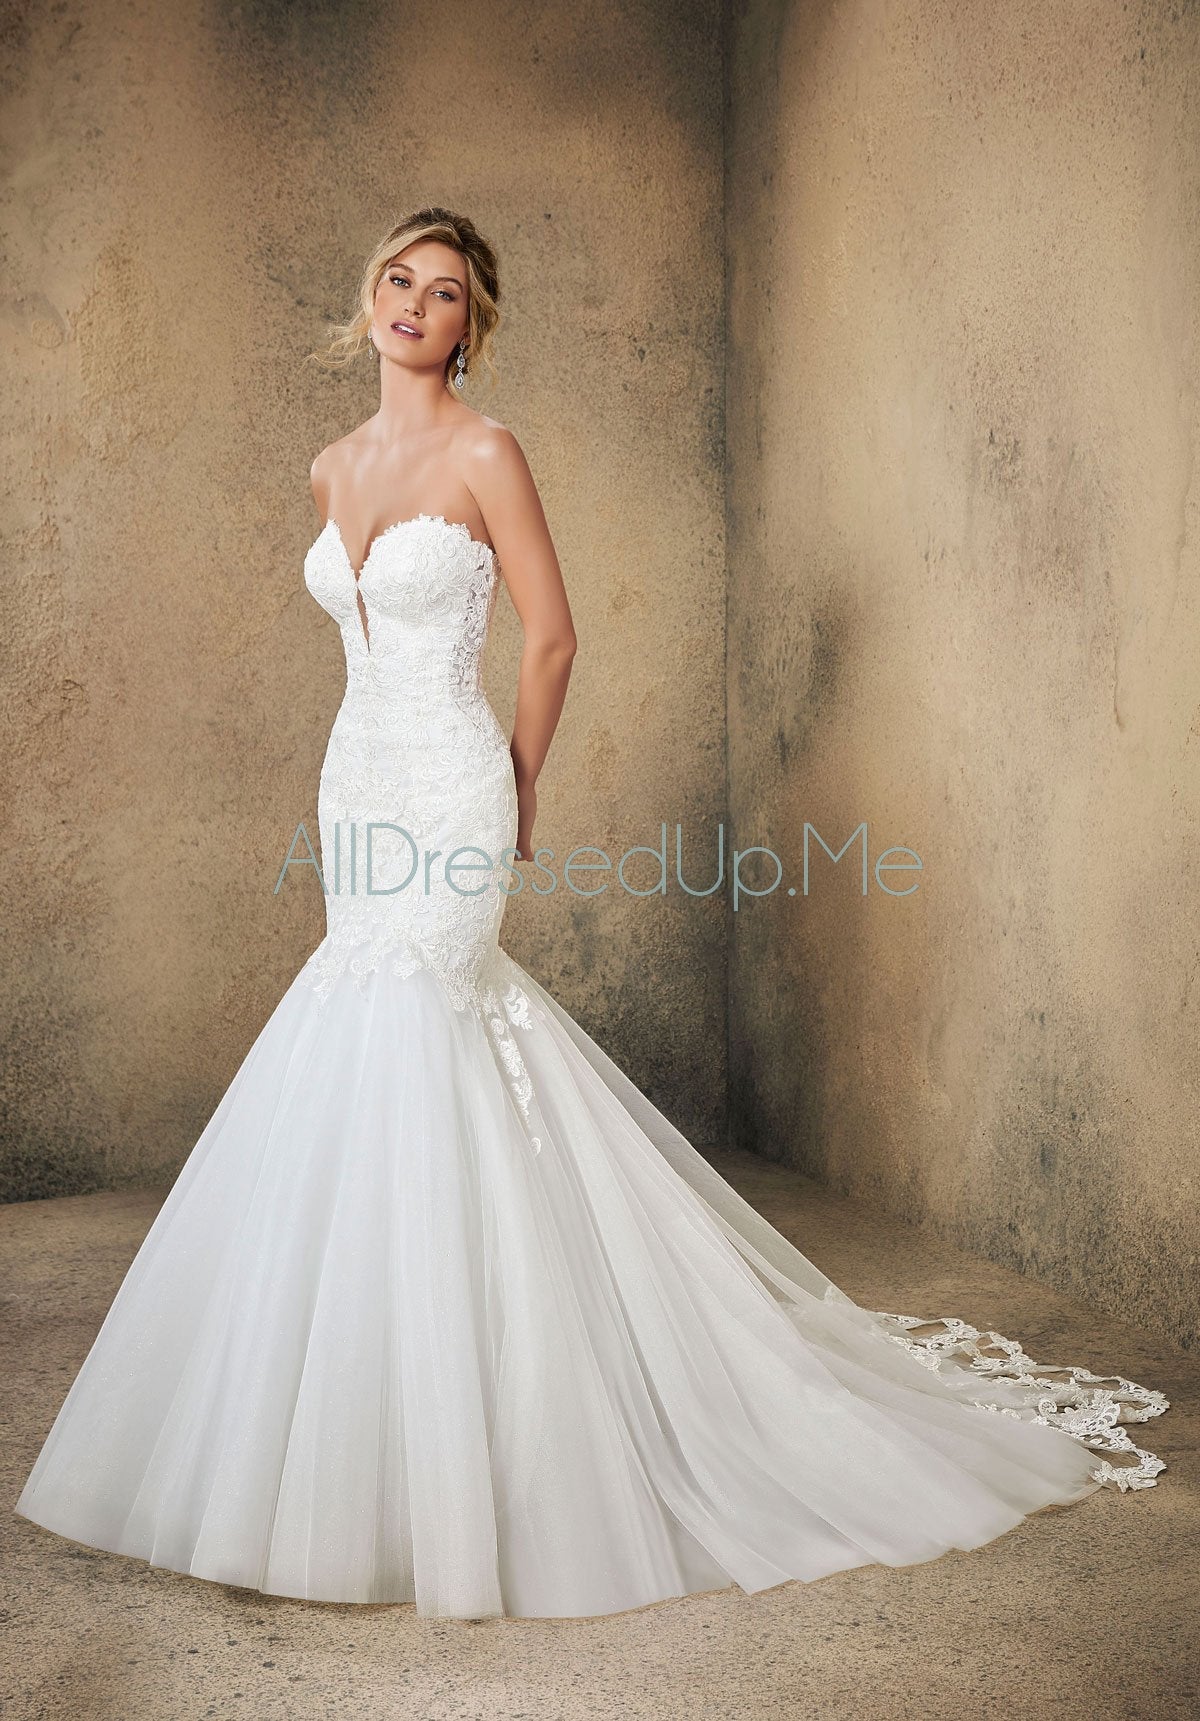 Blu - Renata - 5771 - Cheron's Bridal, Wedding Gown - Morilee Blu - - Wedding Gowns Dresses Chattanooga Hixson Shops Boutiques Tennessee TN Georgia GA MSRP Lowest Prices Sale Discount